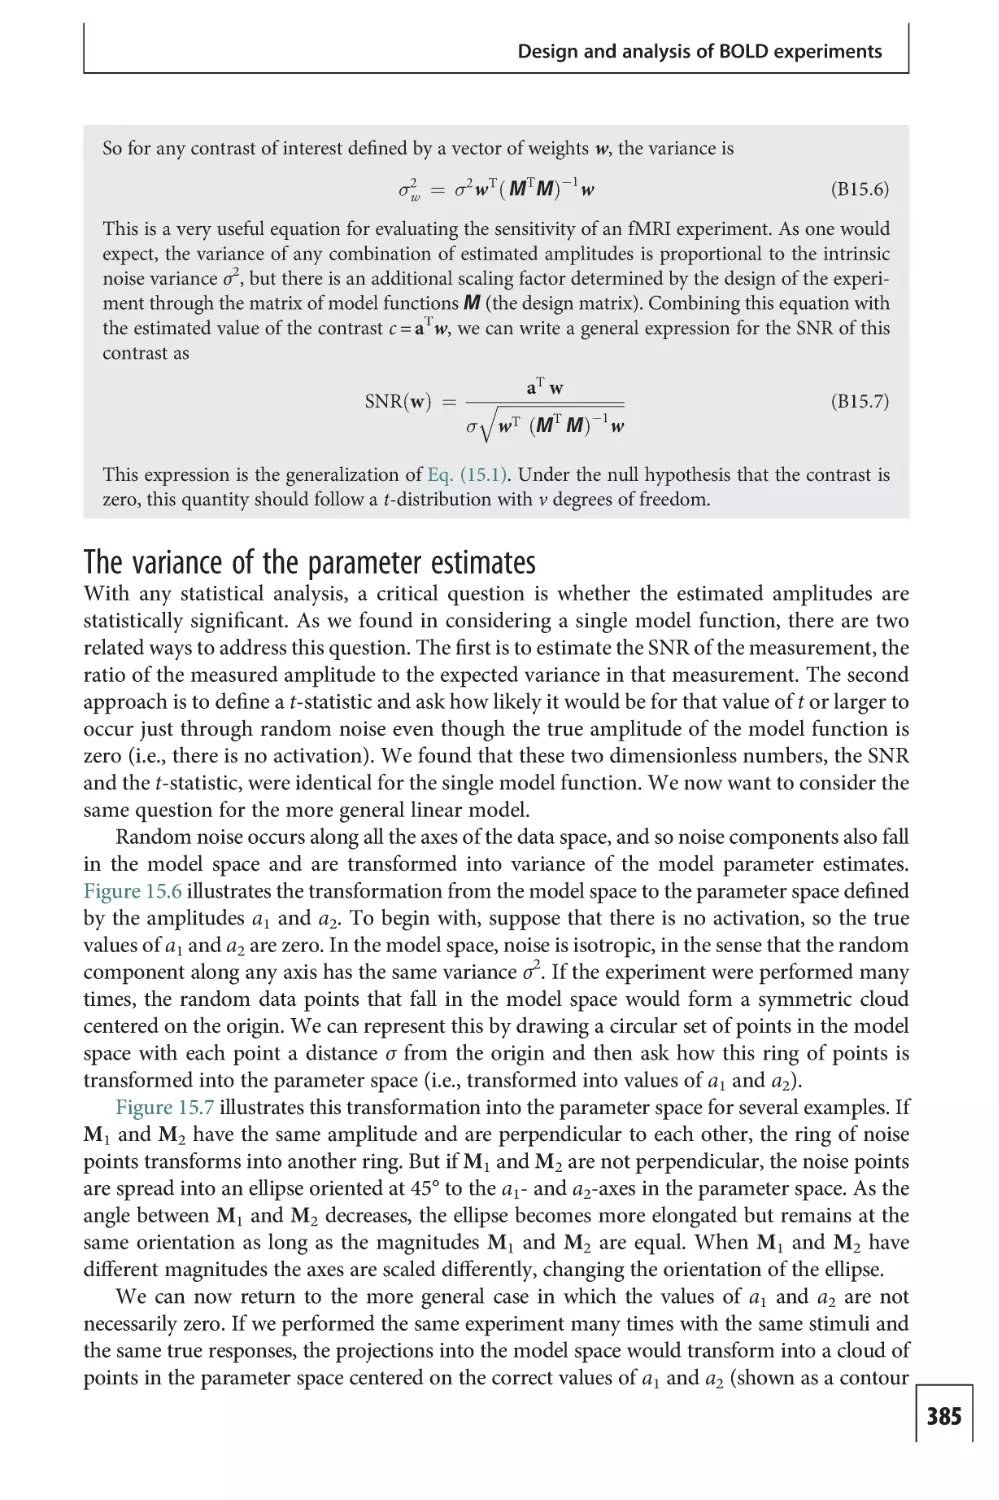 The variance of the parameter estimates